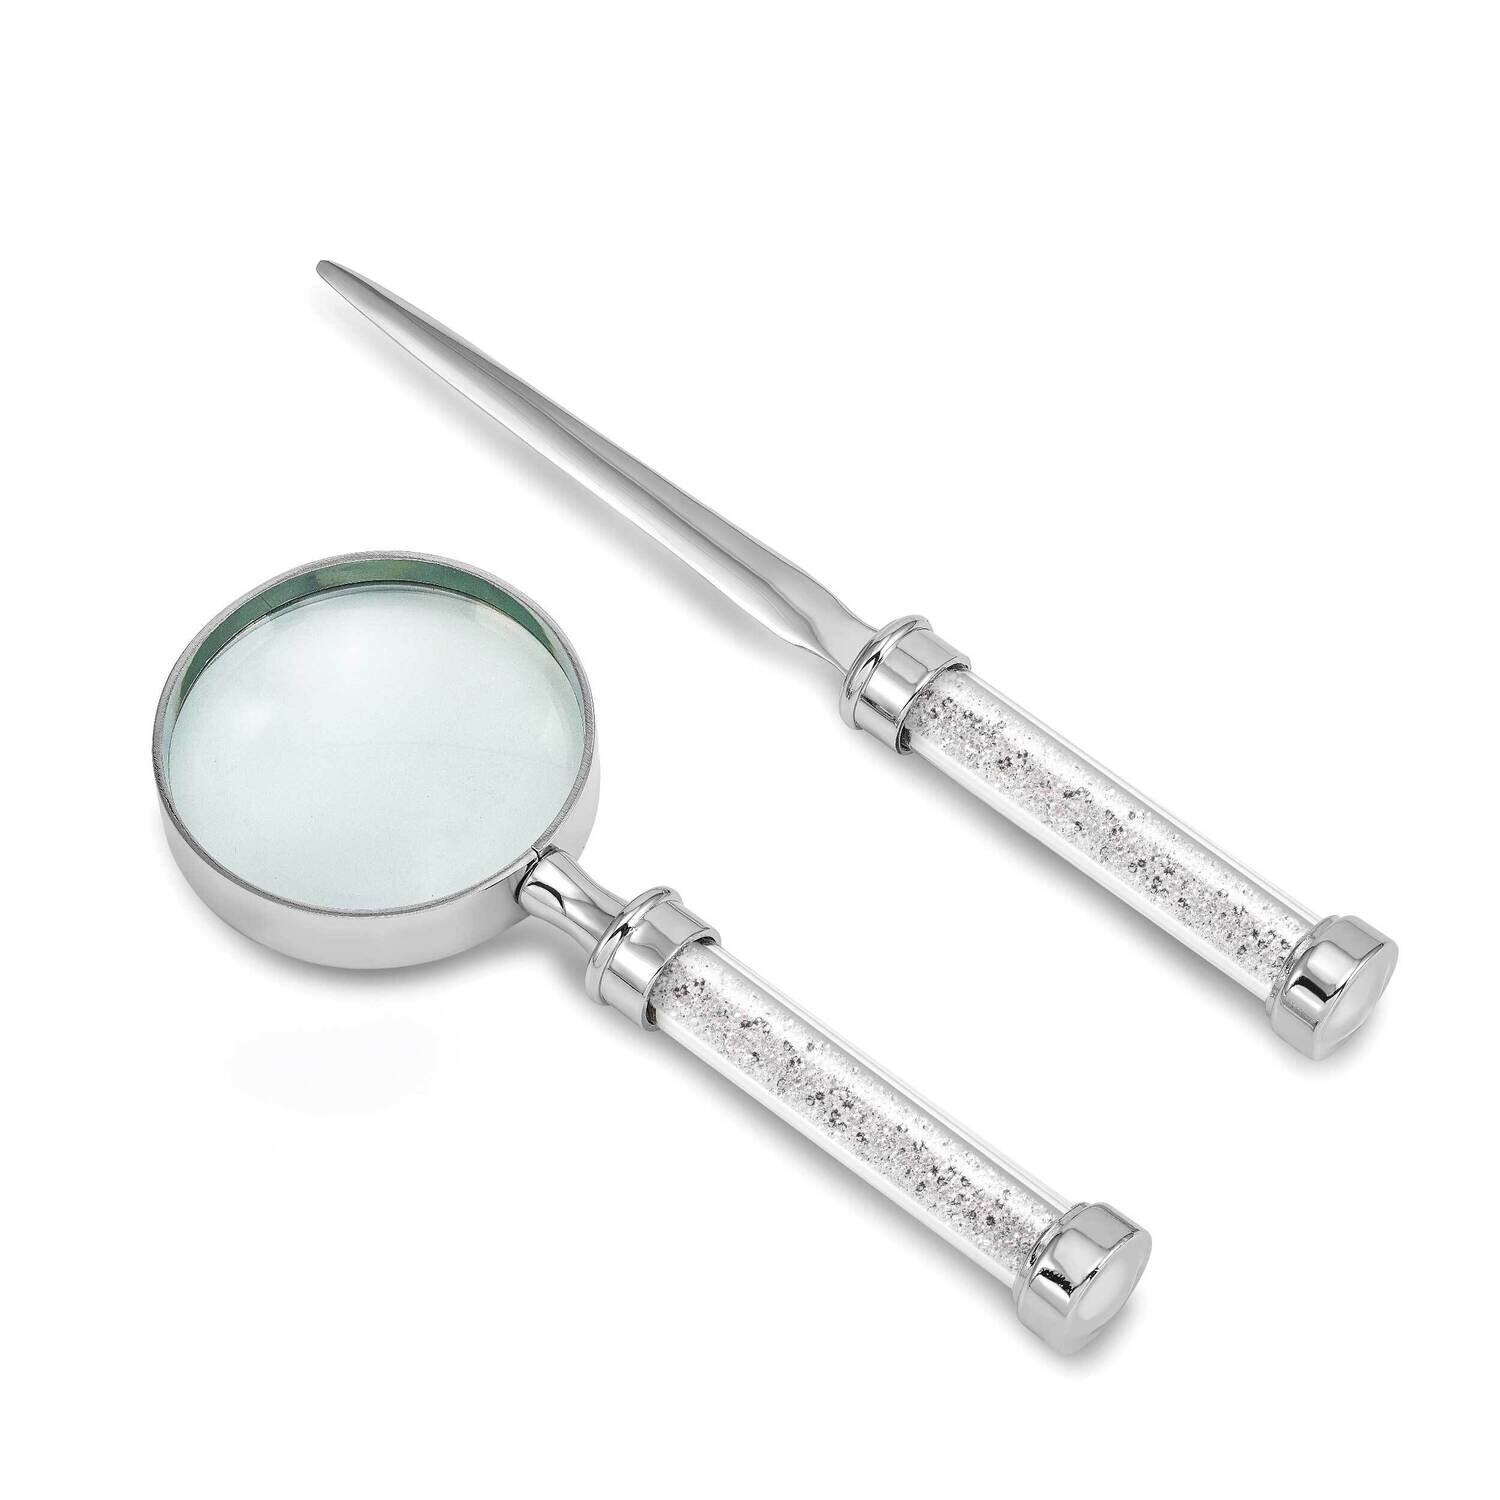 Nickel-Plated with Crystal-Filled Handle Opener/Magnifier Set Stainless Steel JCG108